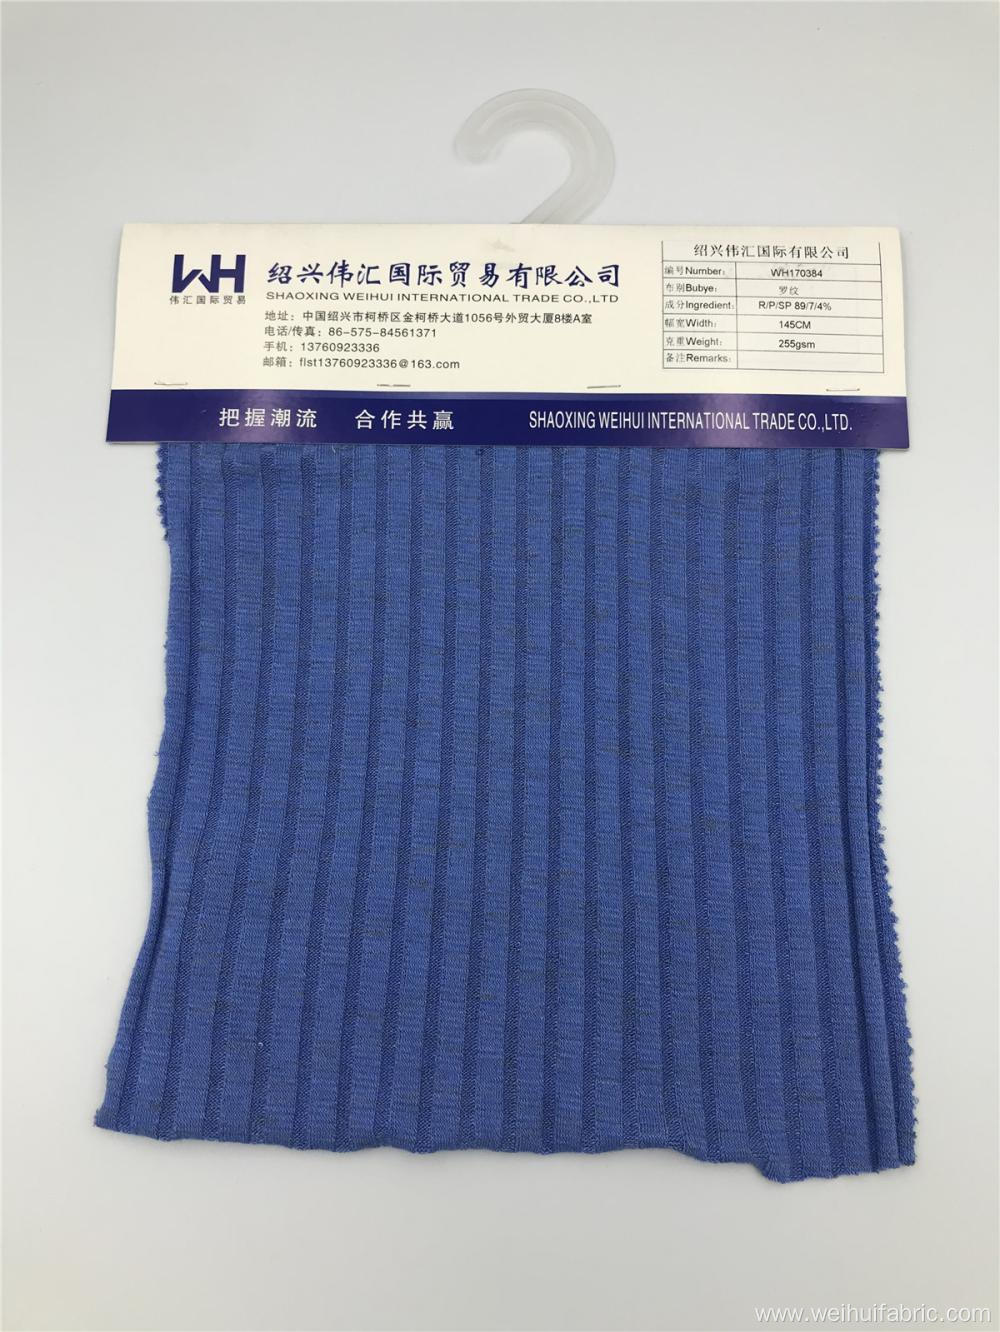 Ribbing Knitted Fabric R/P/SP Blue Fabric